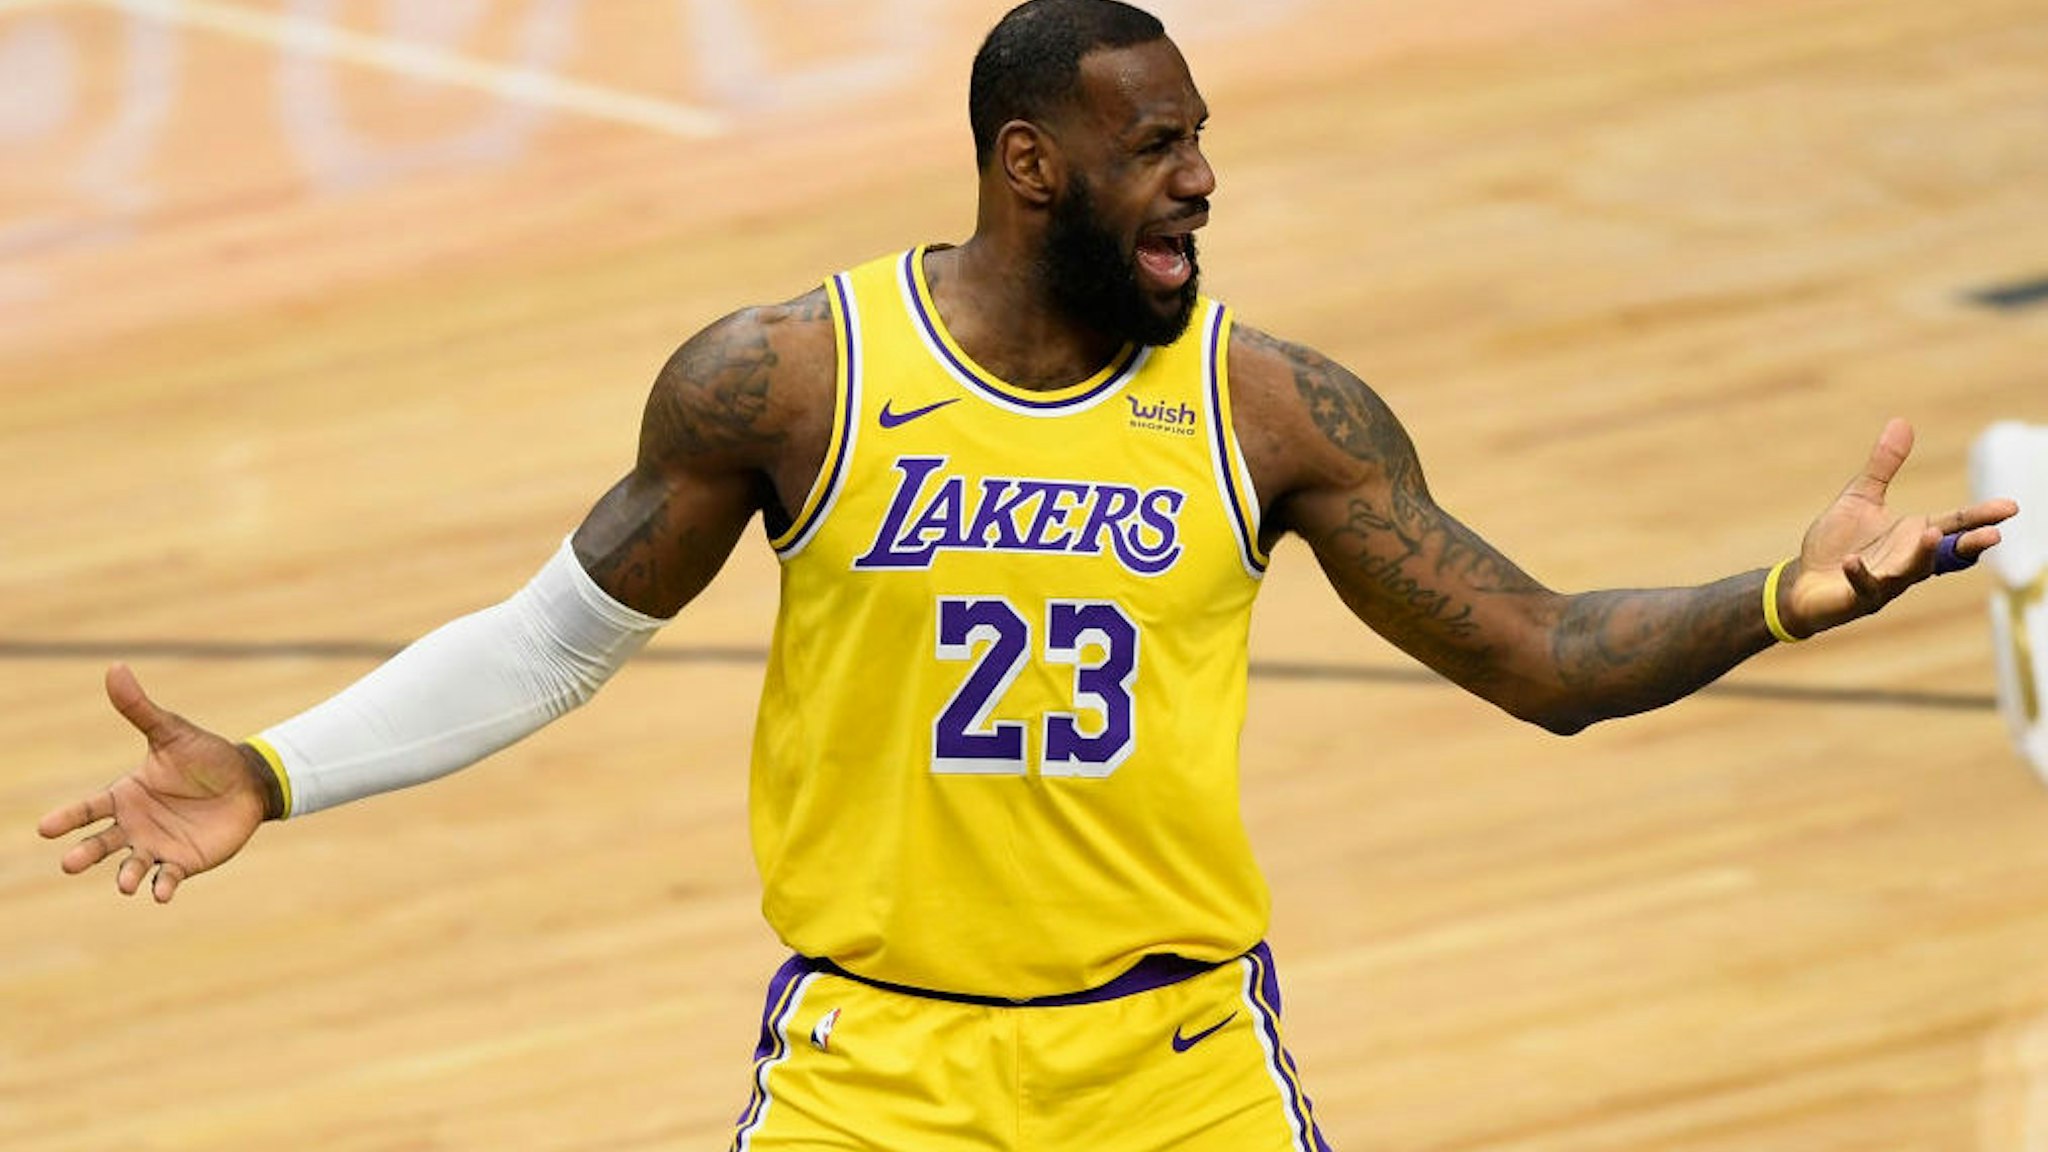 LeBron James #23 of the Los Angeles Lakers reacts during the first quarter of the game against the Minnesota Timberwolves at Target Center on February 16, 2021 in Minneapolis, Minnesota.